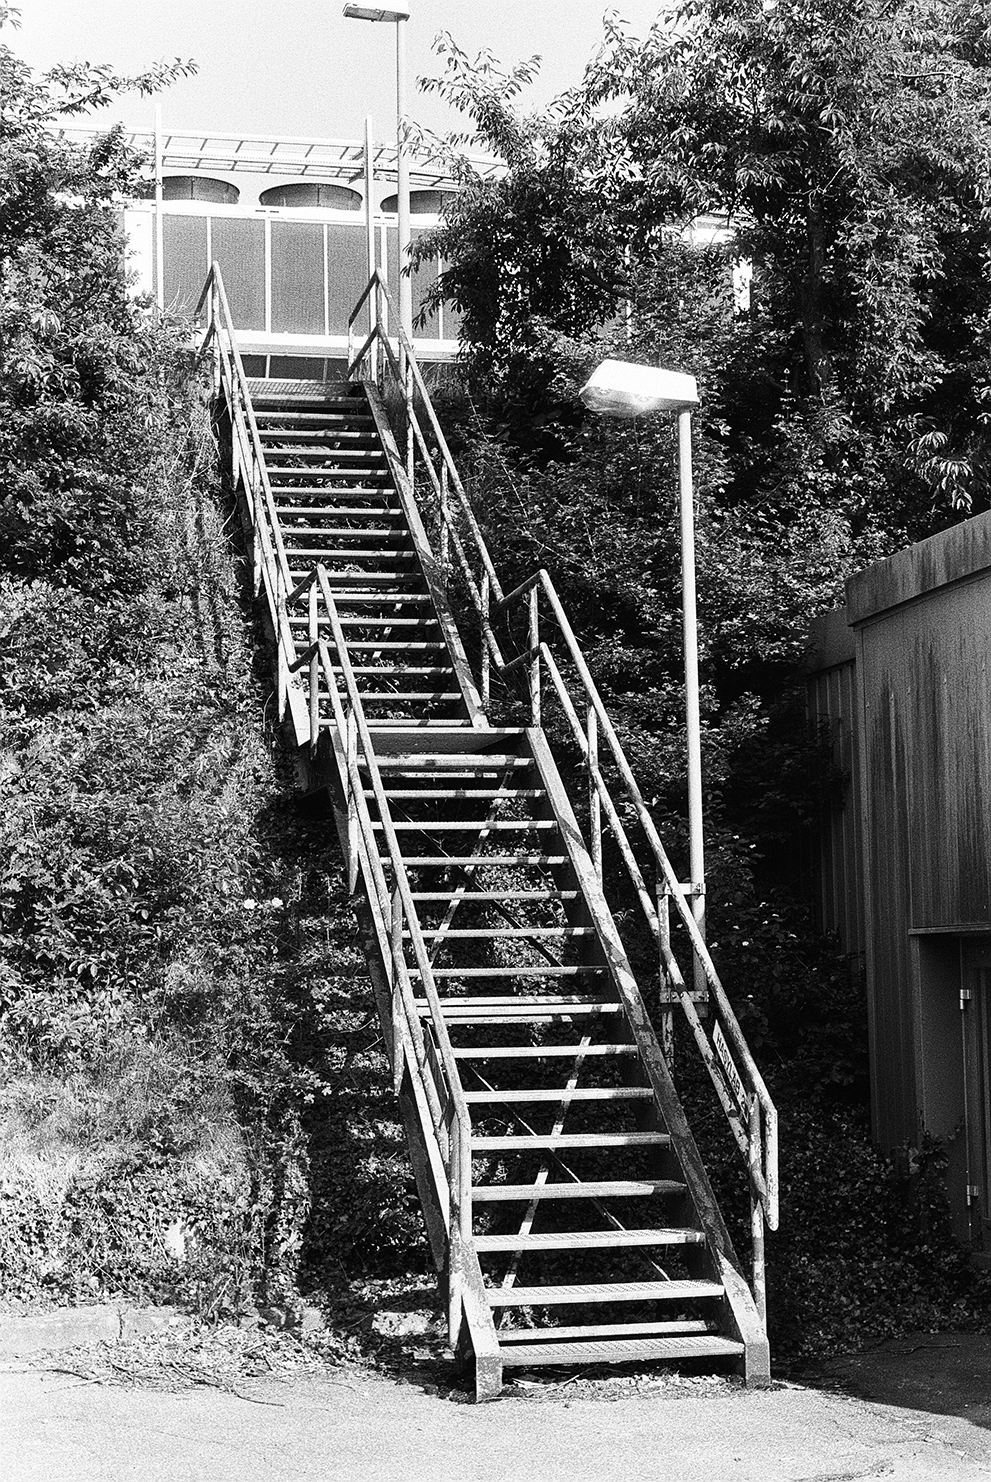 A stair case leading up the hill to large climatization units. Shot Fomapan 400 action.